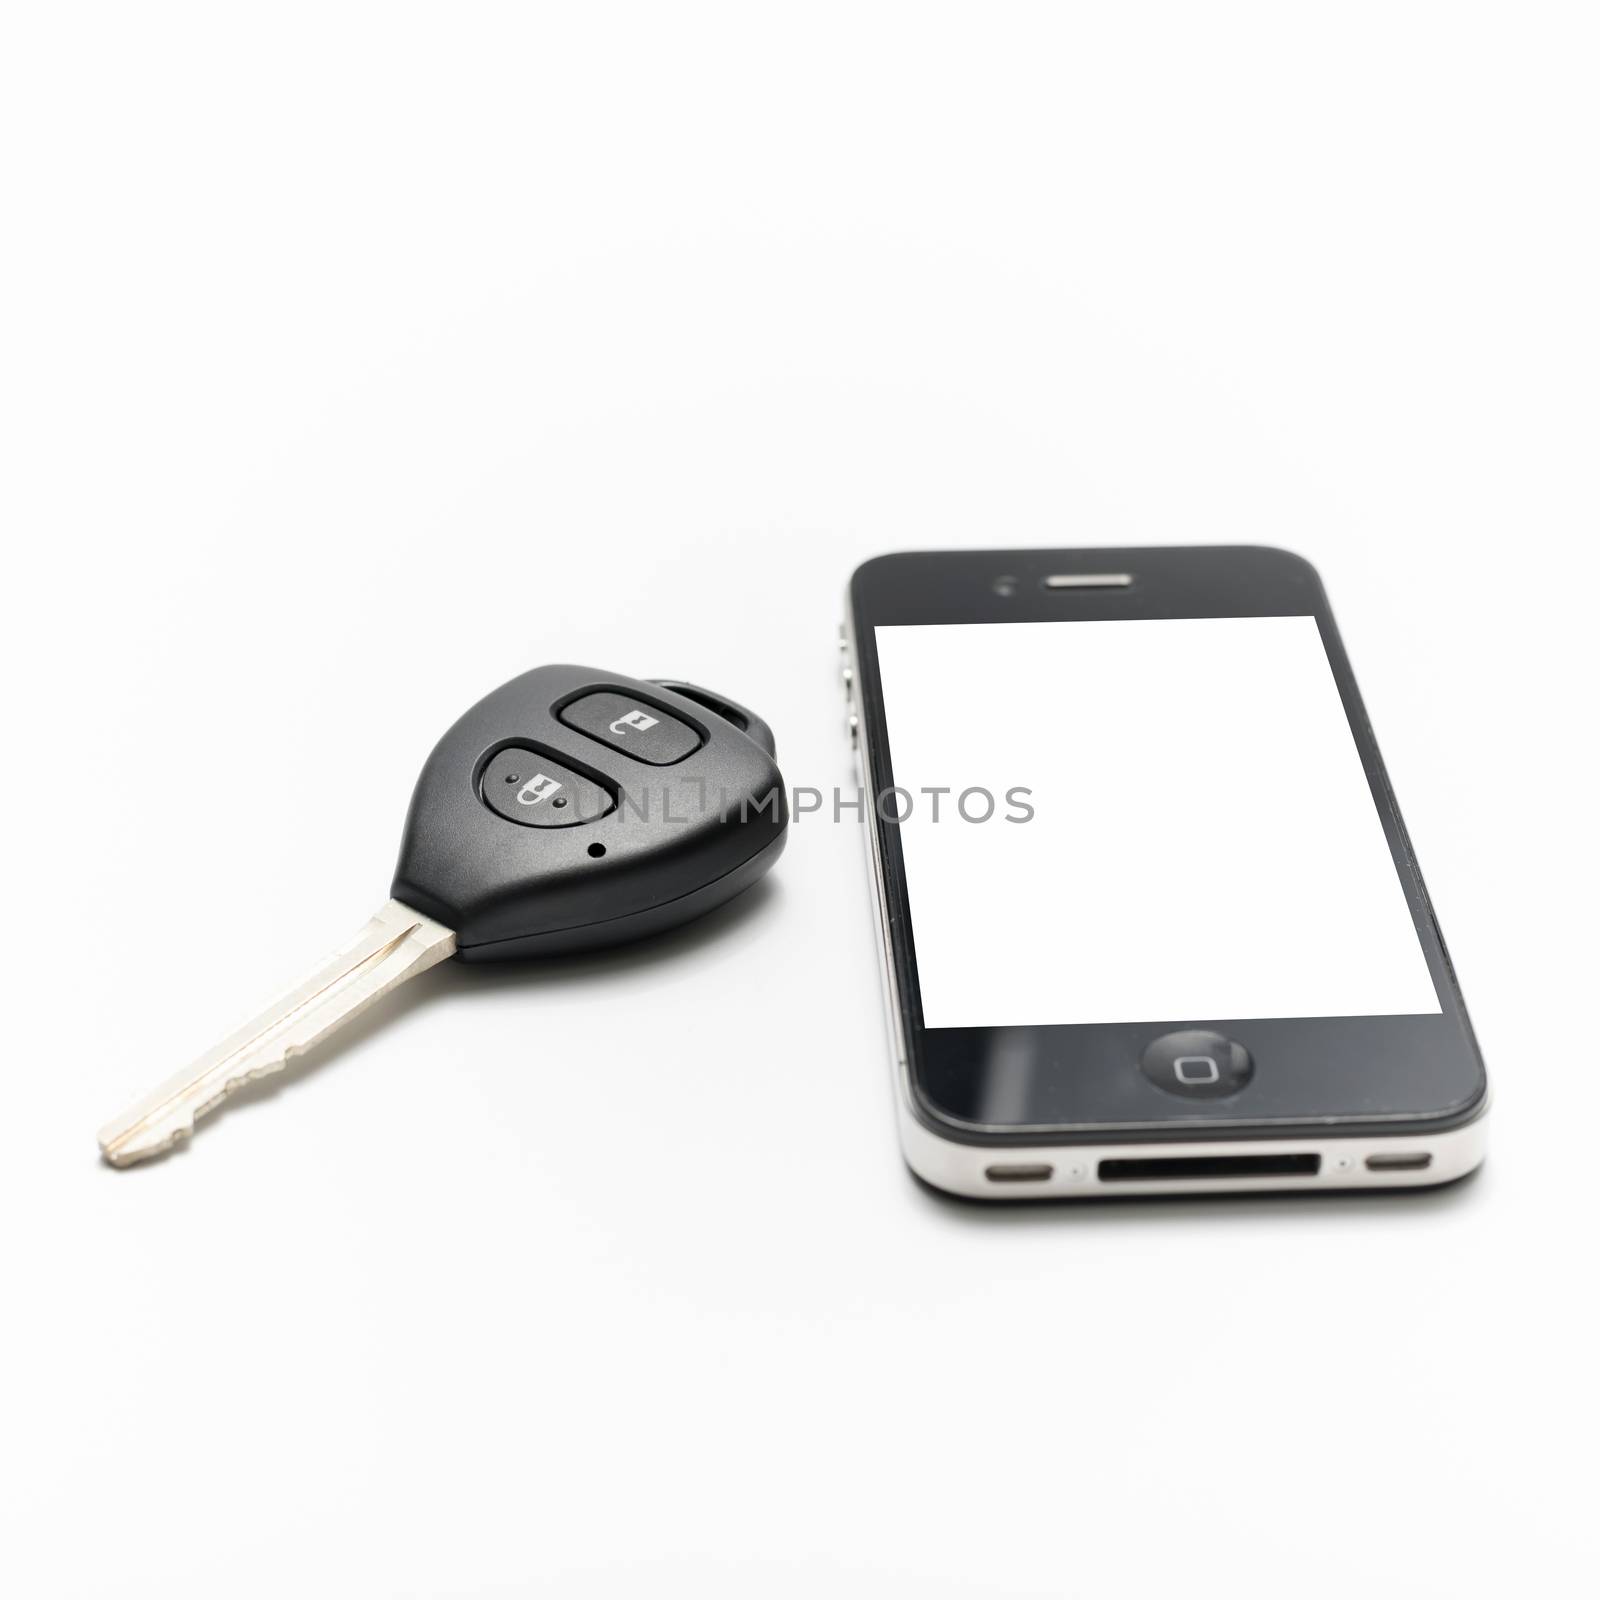 car key with smart phone by ammza12